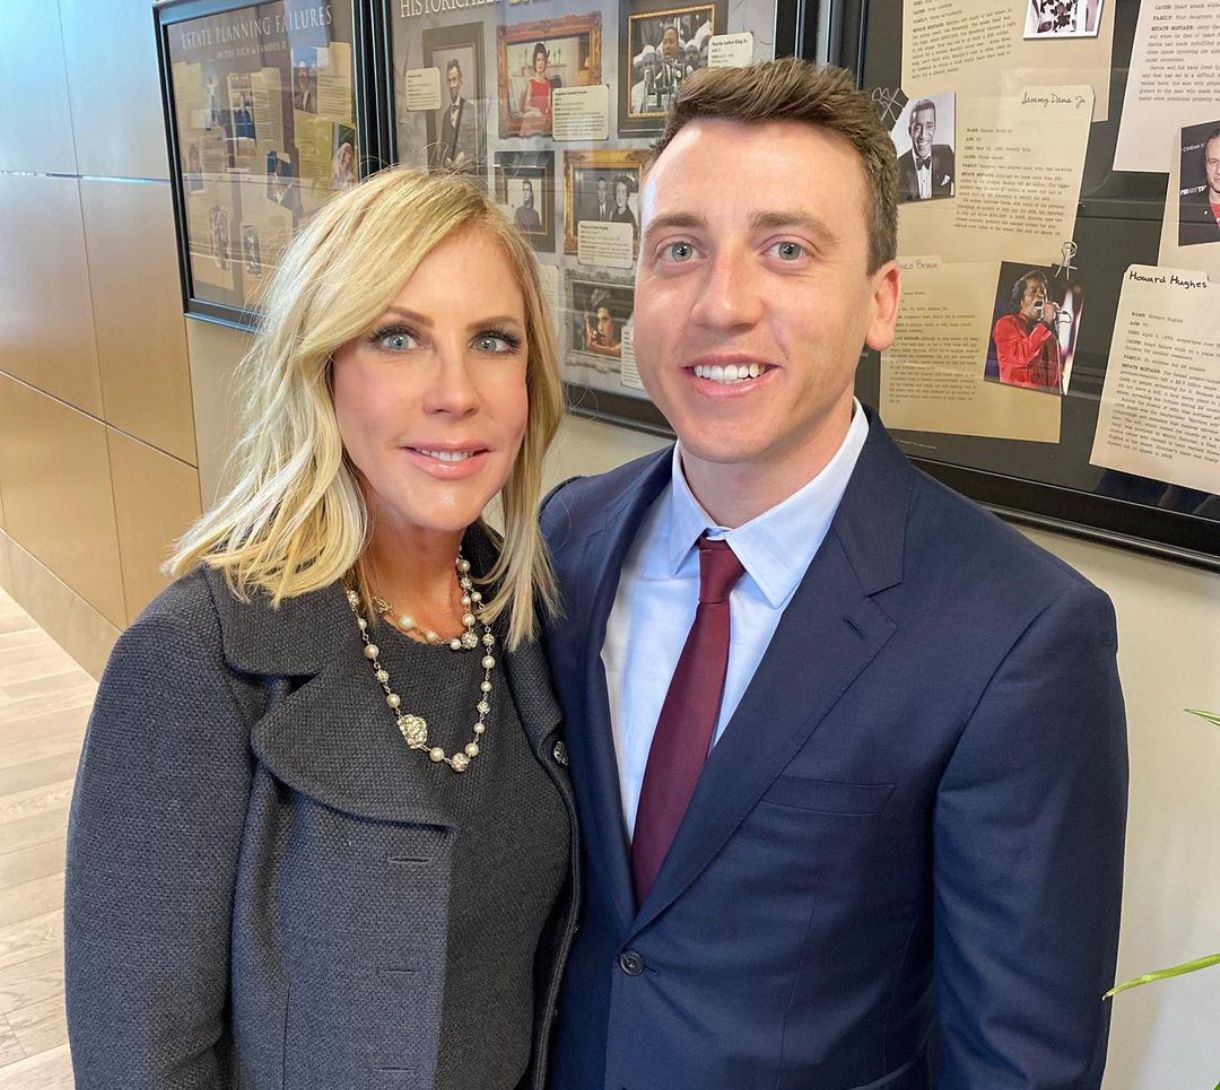 RHOC Star Vicki Gunvalson’s Son Mike Shades Her for Not Believing in “Democracy, Science, and Diversity, Claims He’s the “Only Normal One” in Family